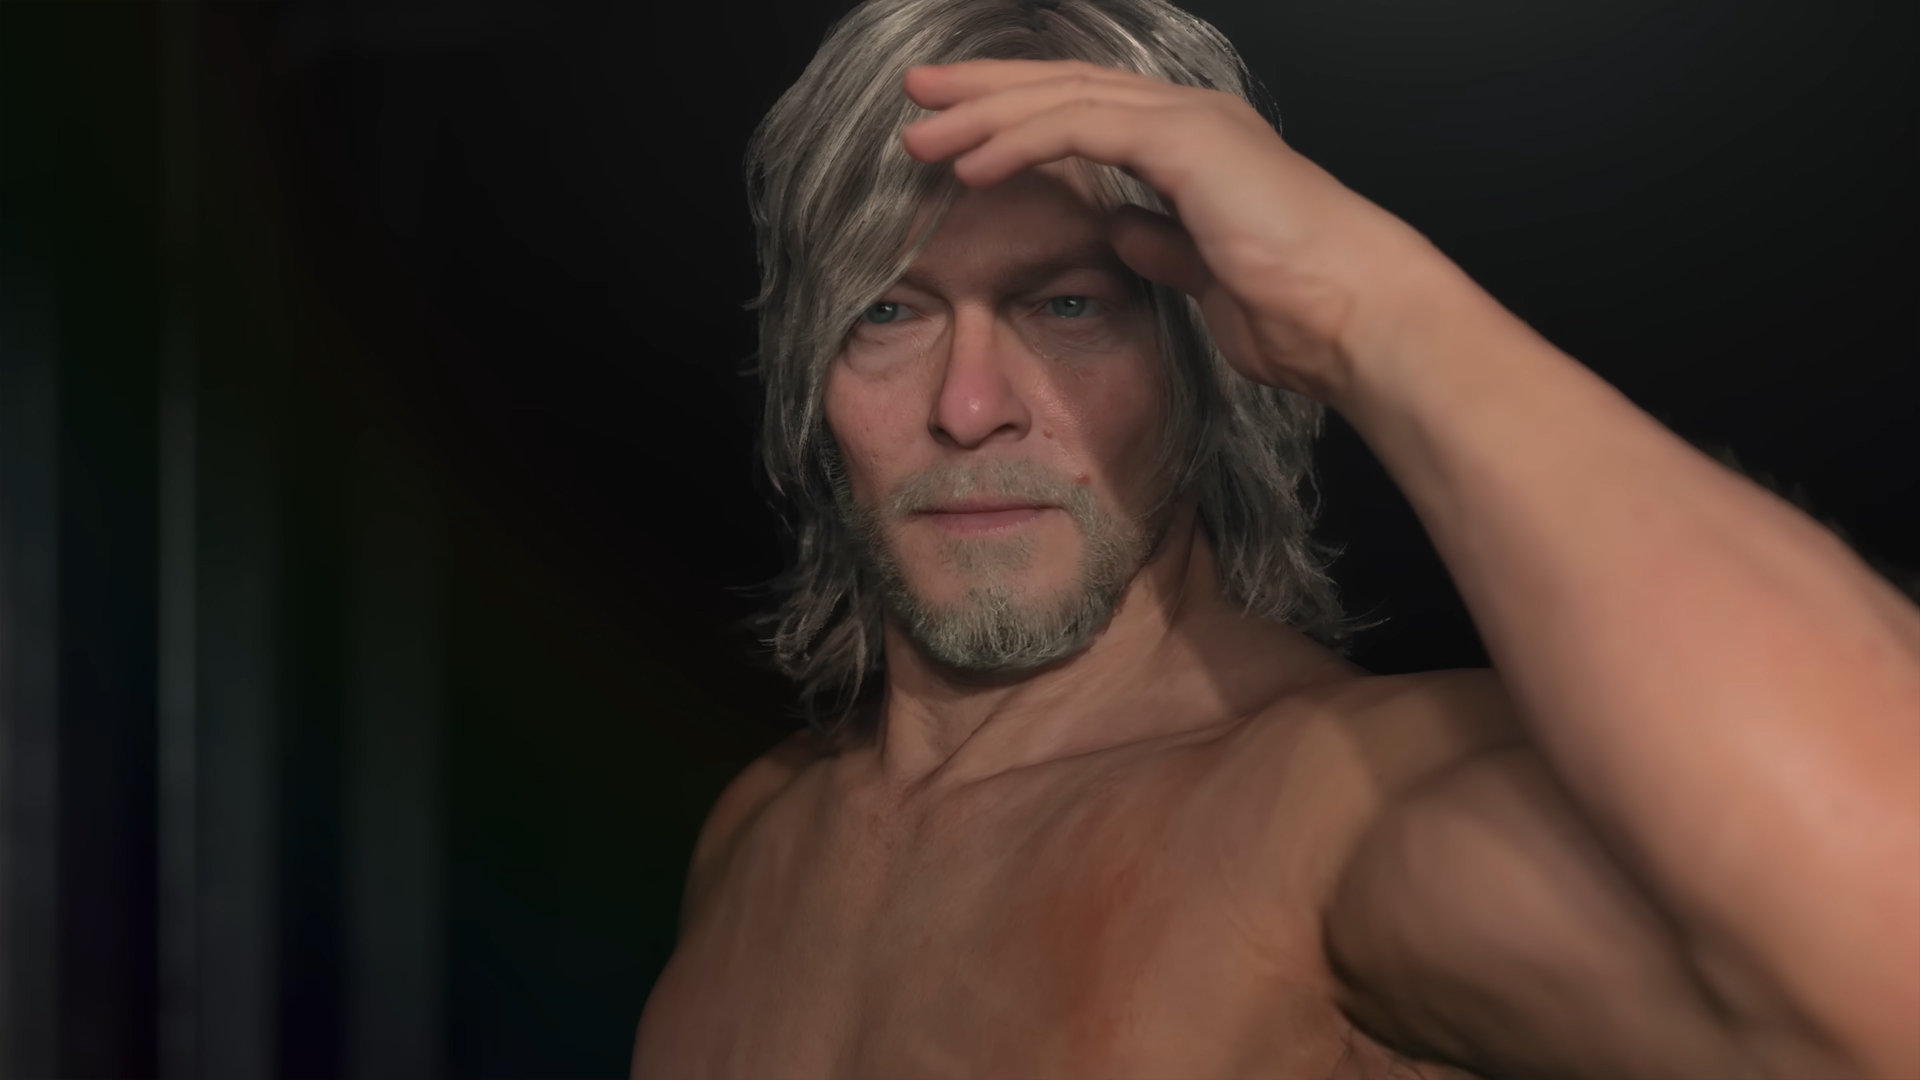 Troy Baker joins Death Stranding cast as the mysterious Man in the